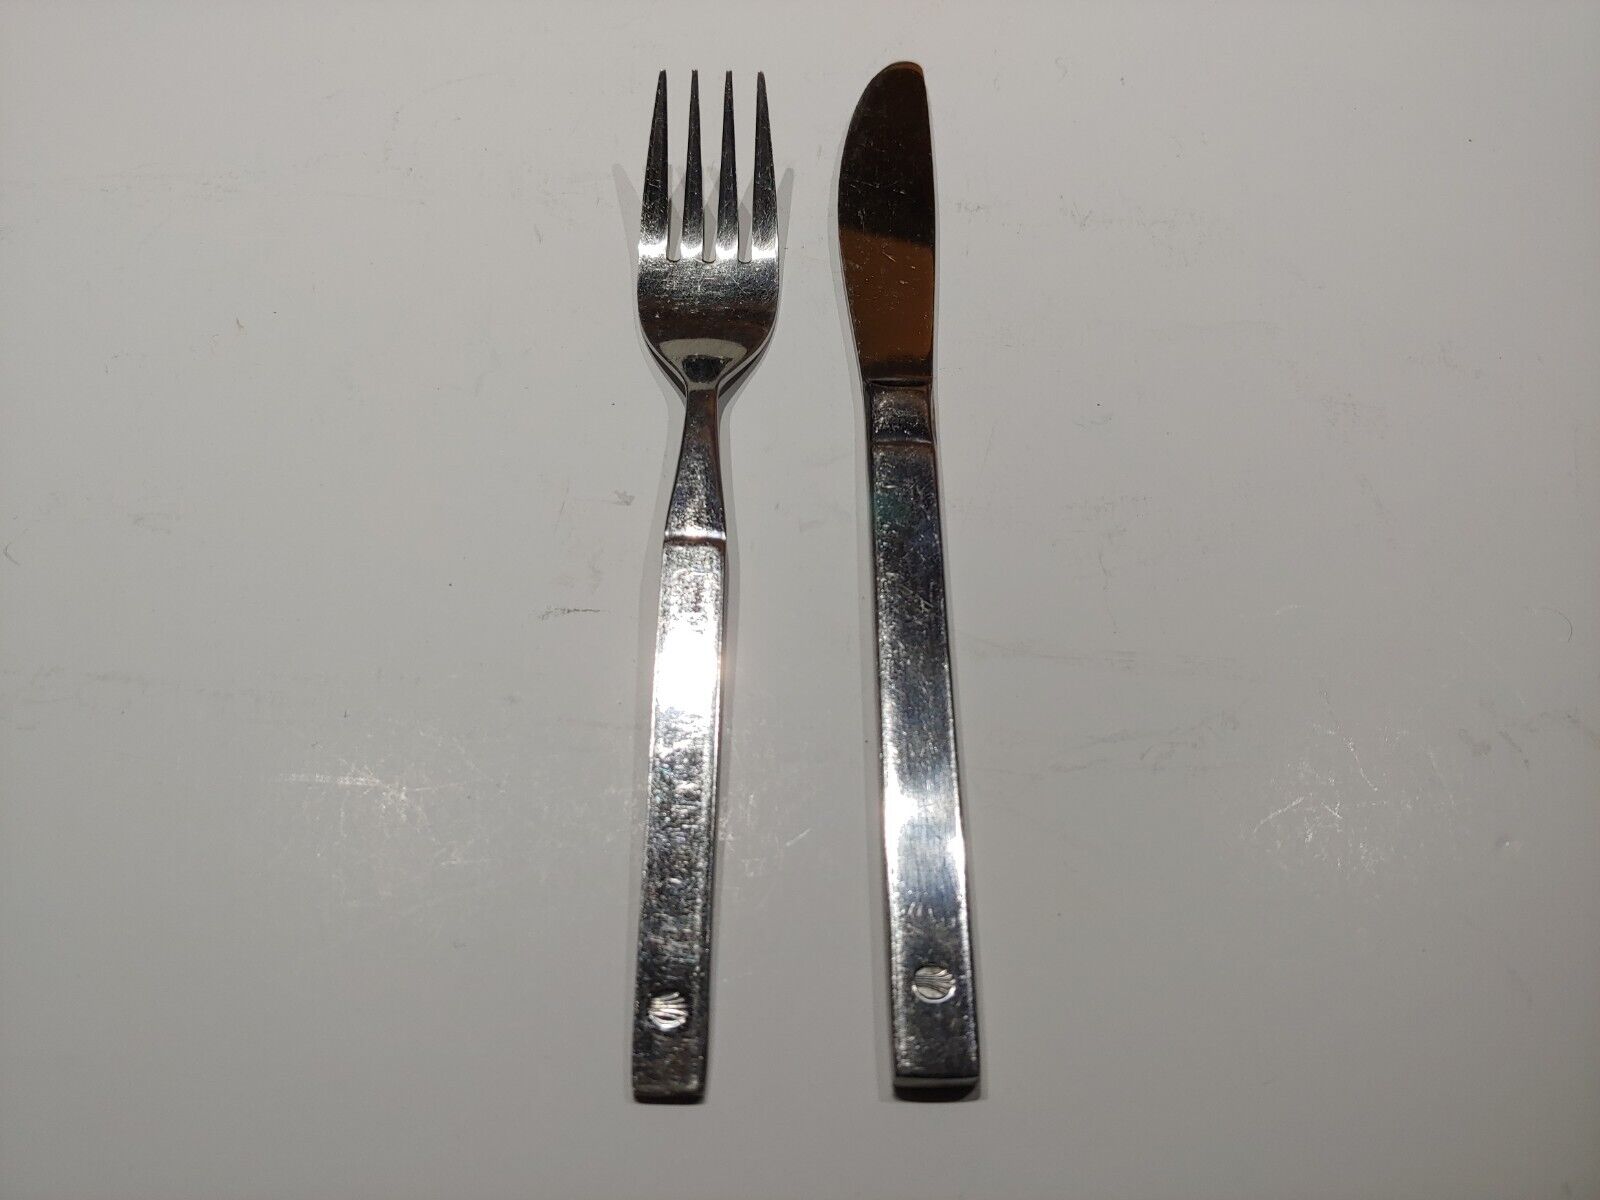 Vintage Continental Airlines Older Logo Silverware Matching Knife and Fork